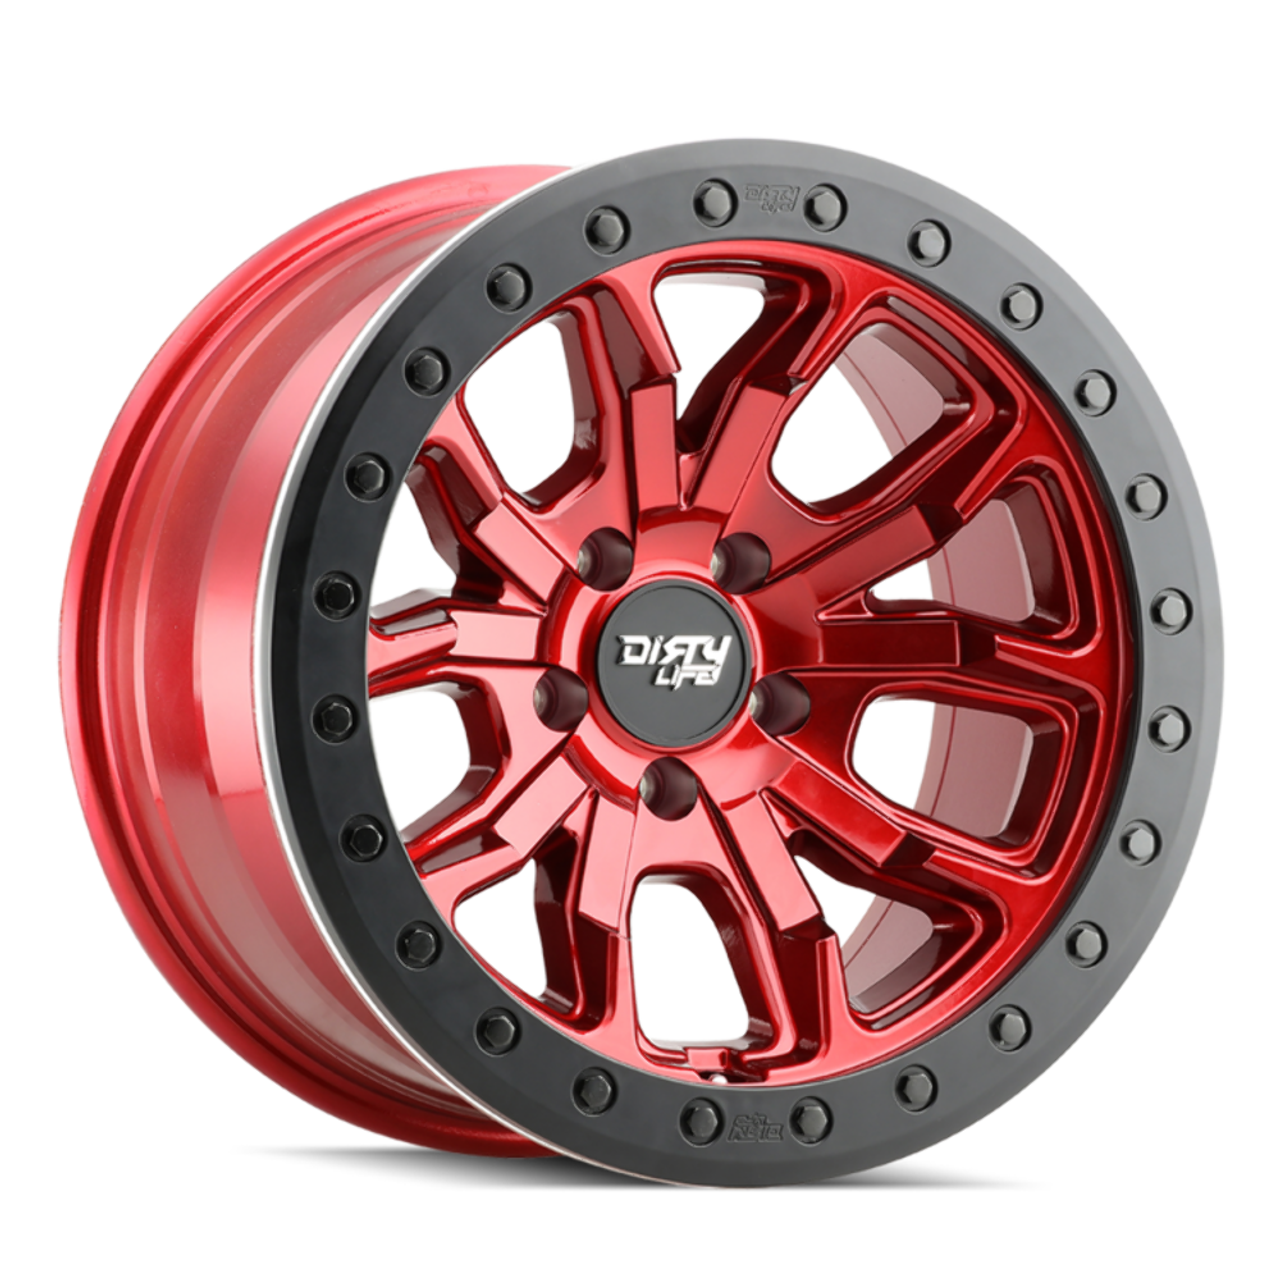 17" Dirty Life Dt-1 17x9 Crimson Candy Red 5x5 Wheel -12mm For Jeep Wrangler Rim